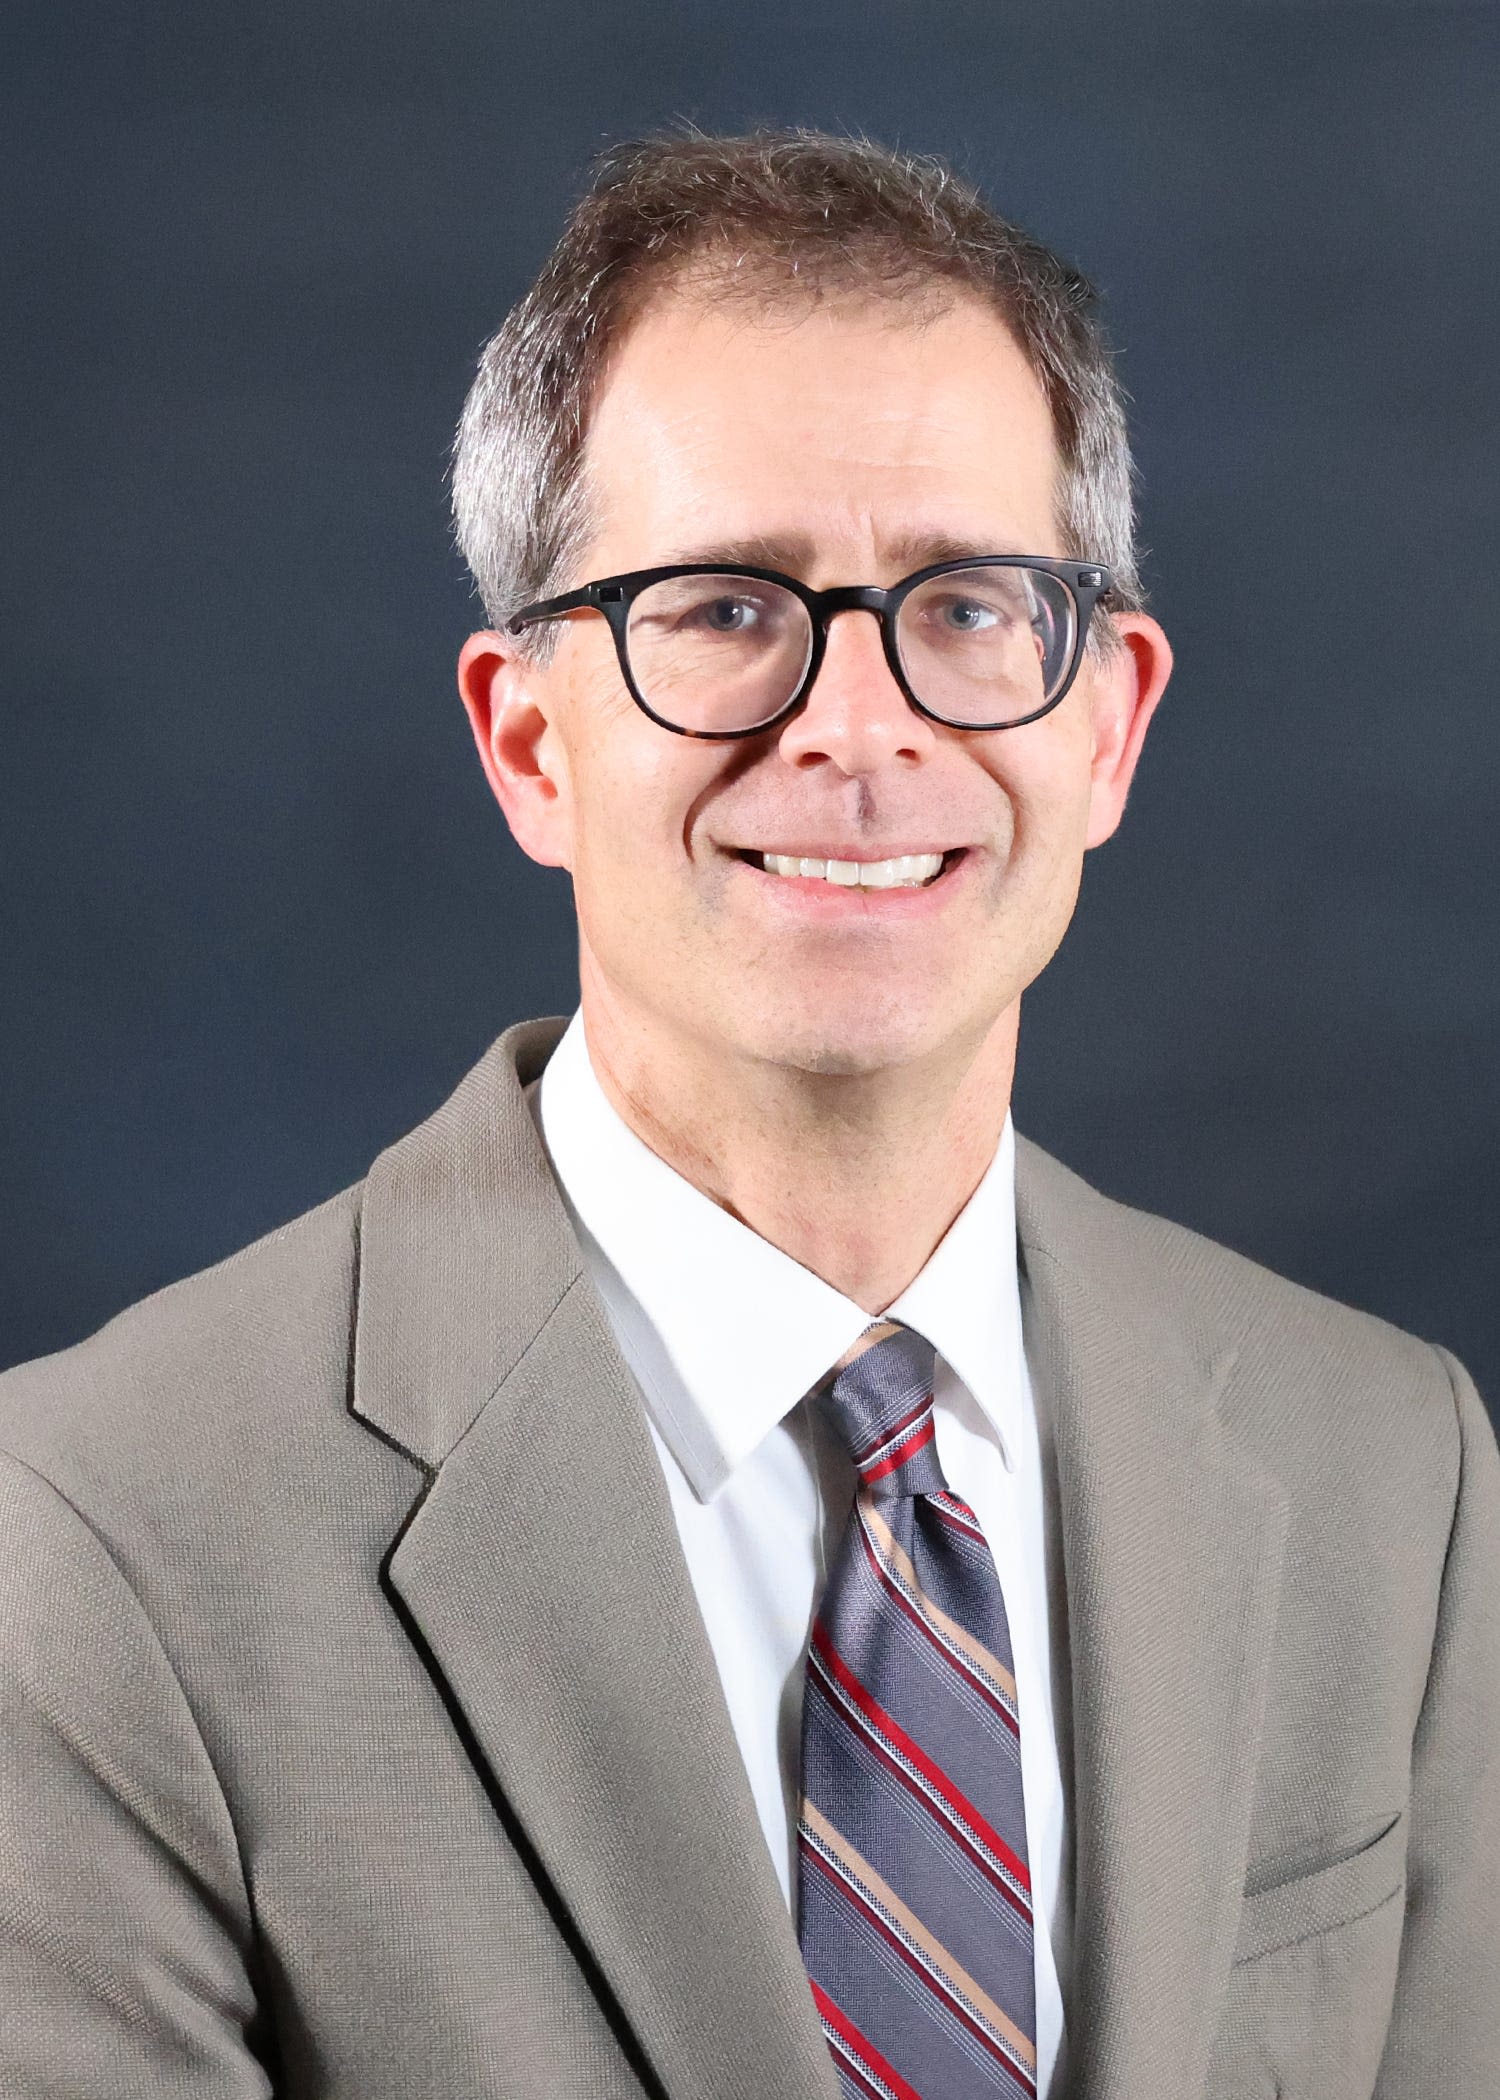 Iowa State University selects Mississippi State's Jason Keith as next provost